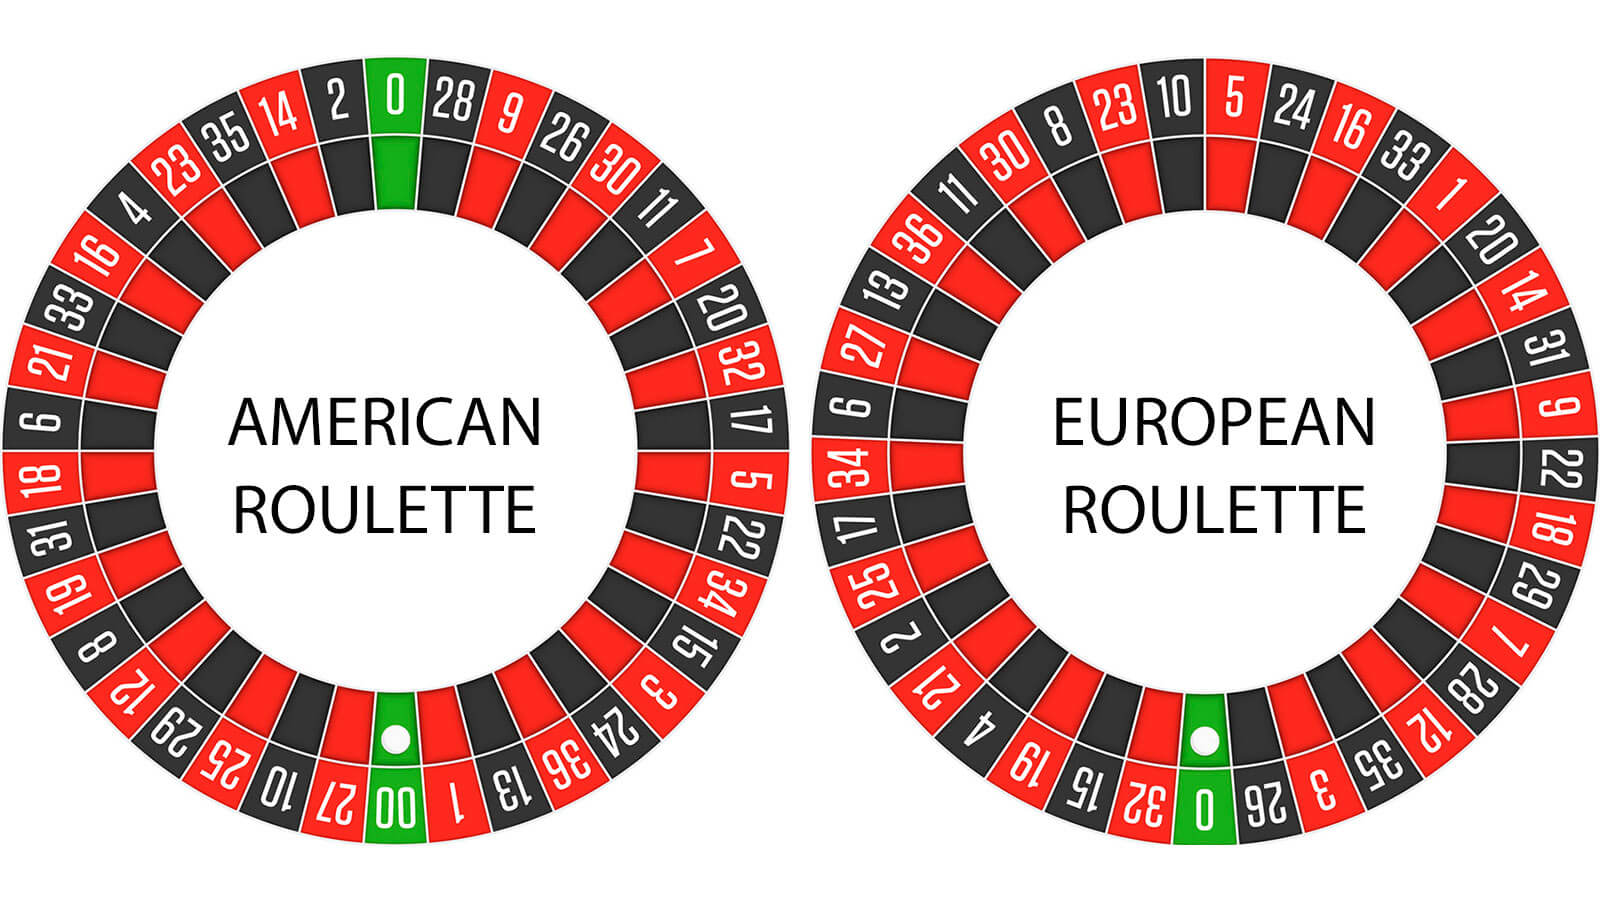 Is Roulette more popular in Europe than in other regions?